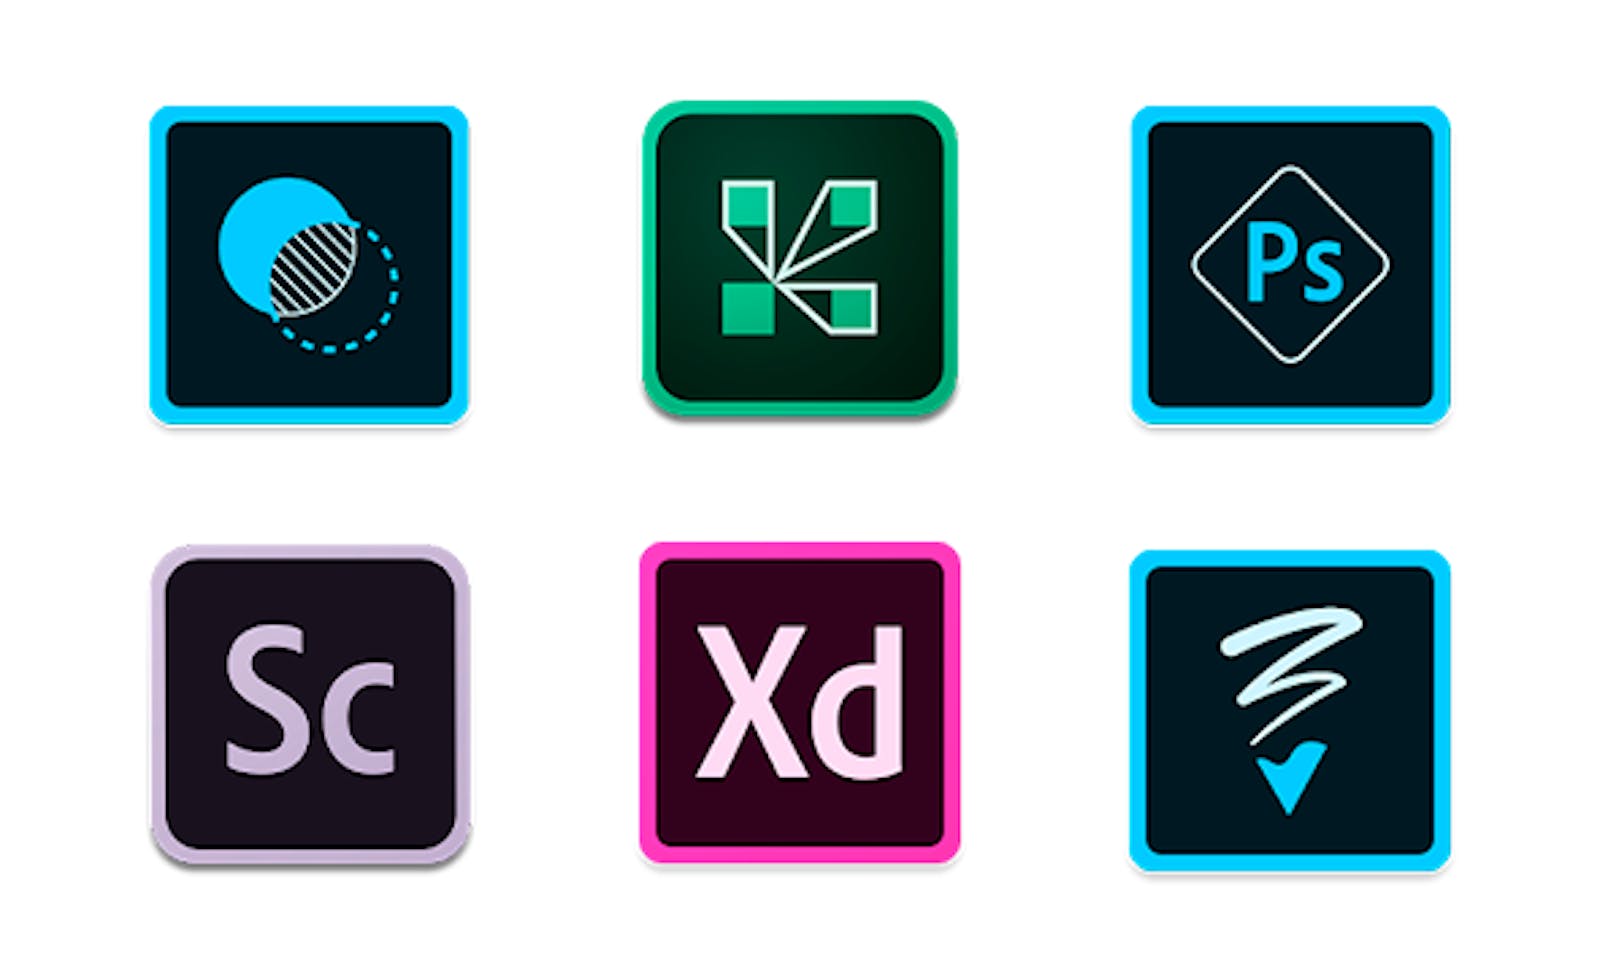 Icons from Adobe apps on Google Play Store